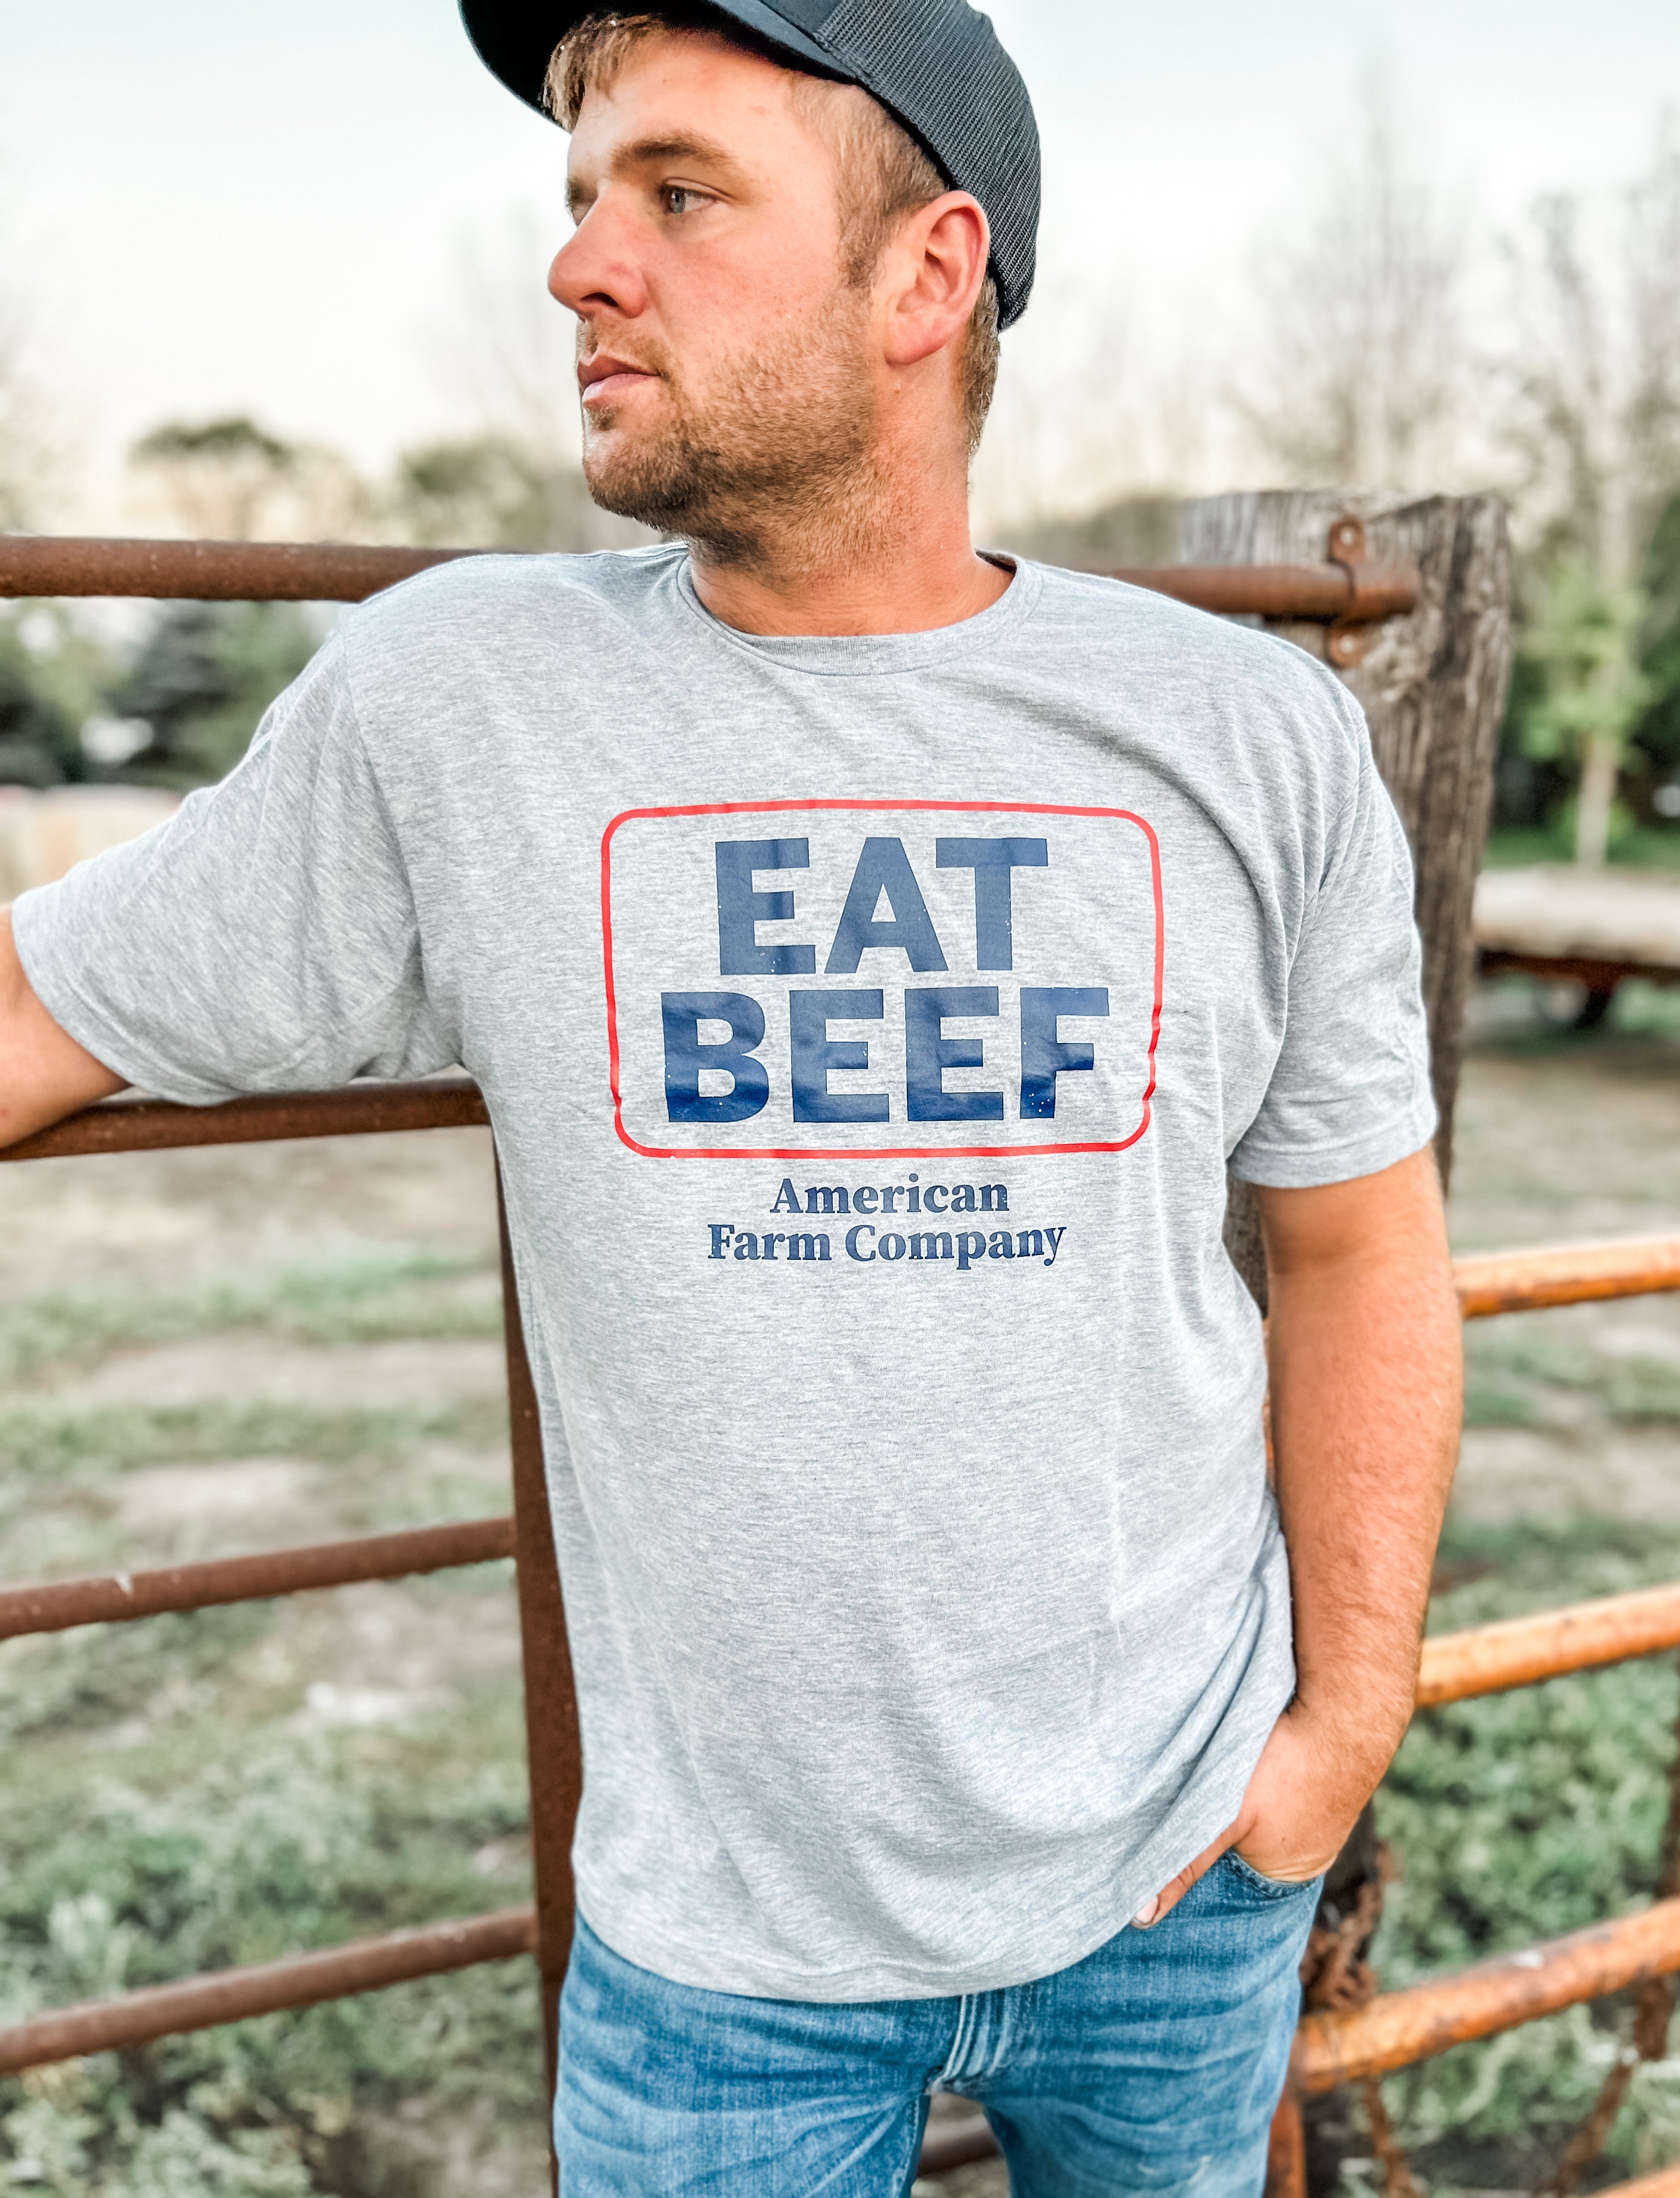 A man in the field wearing jeans, a cap, and an Eat Beef Shirt